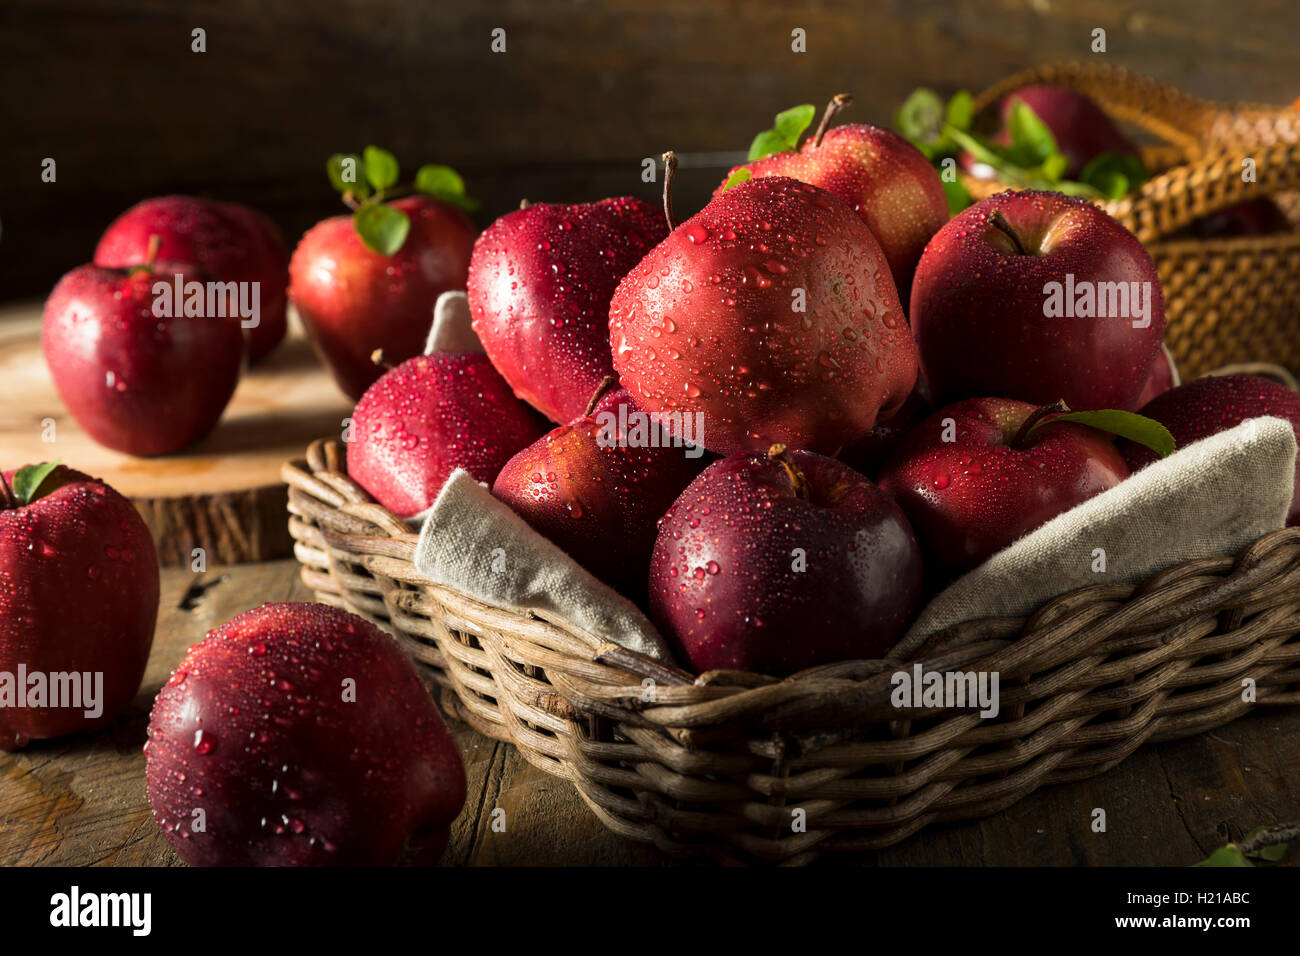 https://c8.alamy.com/comp/H21ABC/raw-organic-red-delicious-apples-ready-to-eat-H21ABC.jpg